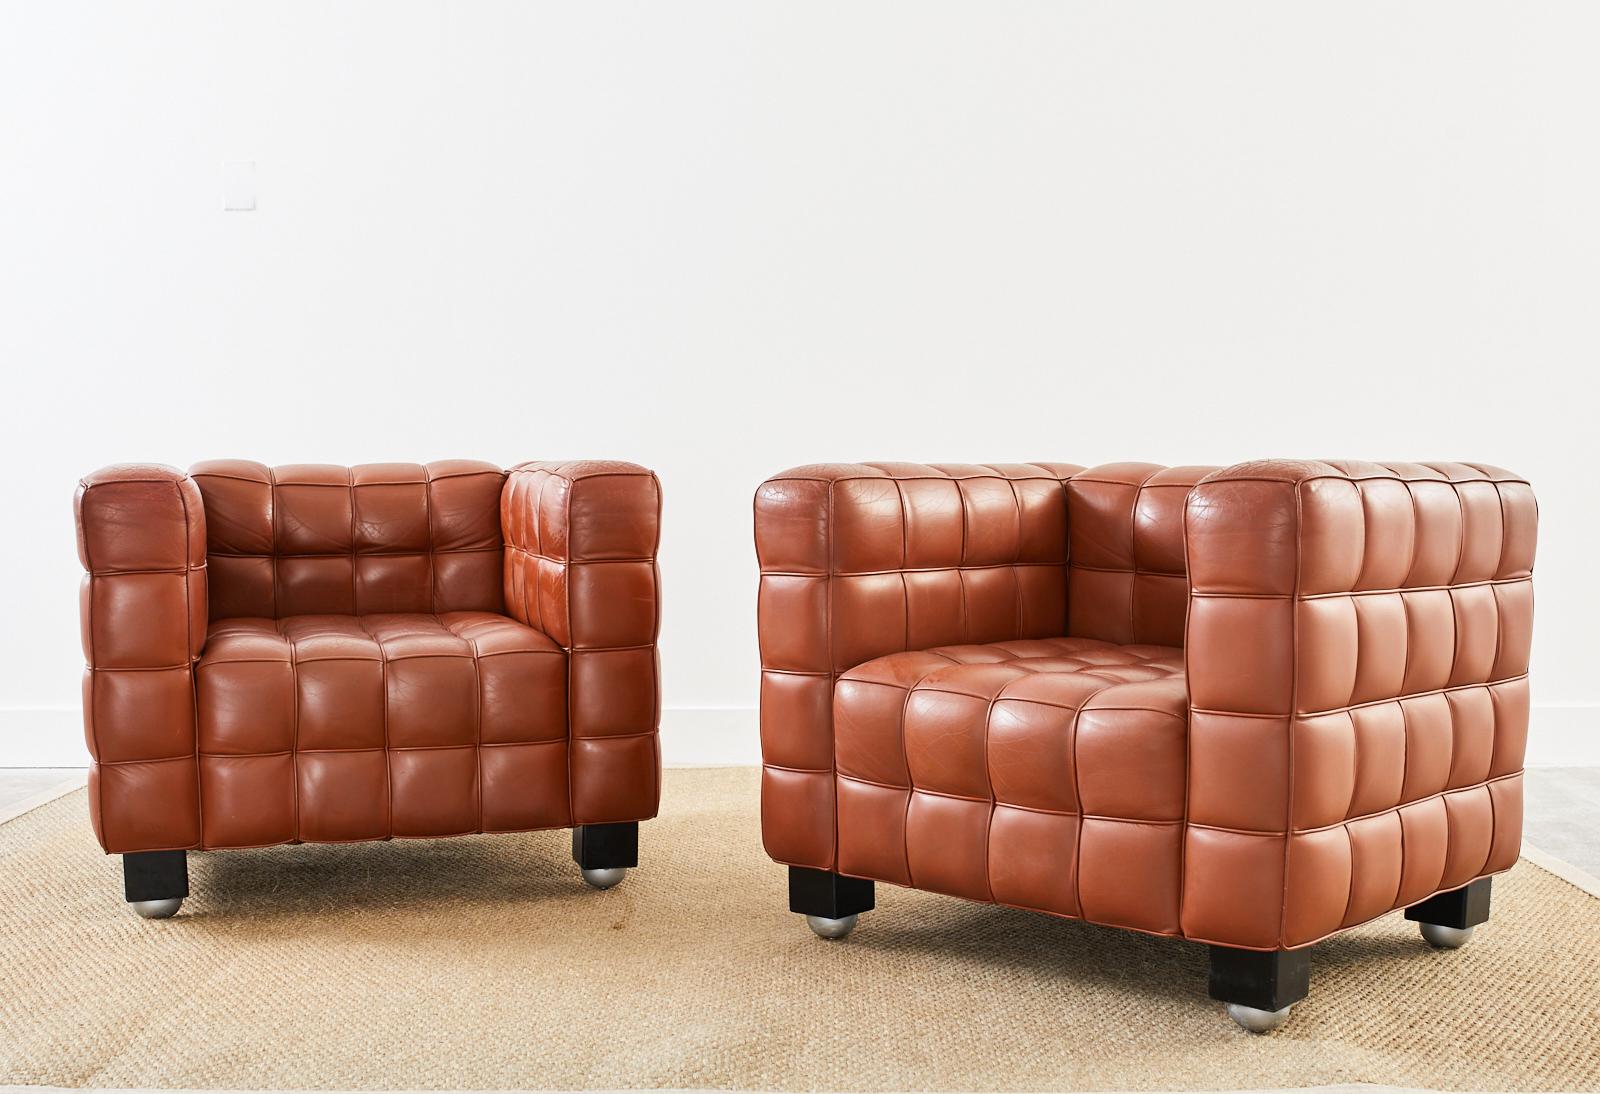 Rare authentic pair of labeled leather Kubus armchairs or lounge chairs designed in 1910 by Austrian Vienna secession designer Josef Hoffmann (1870-1956 Austrian). Manufactured by Wittmann in Vienna, Austria late 20th century. Iconic design